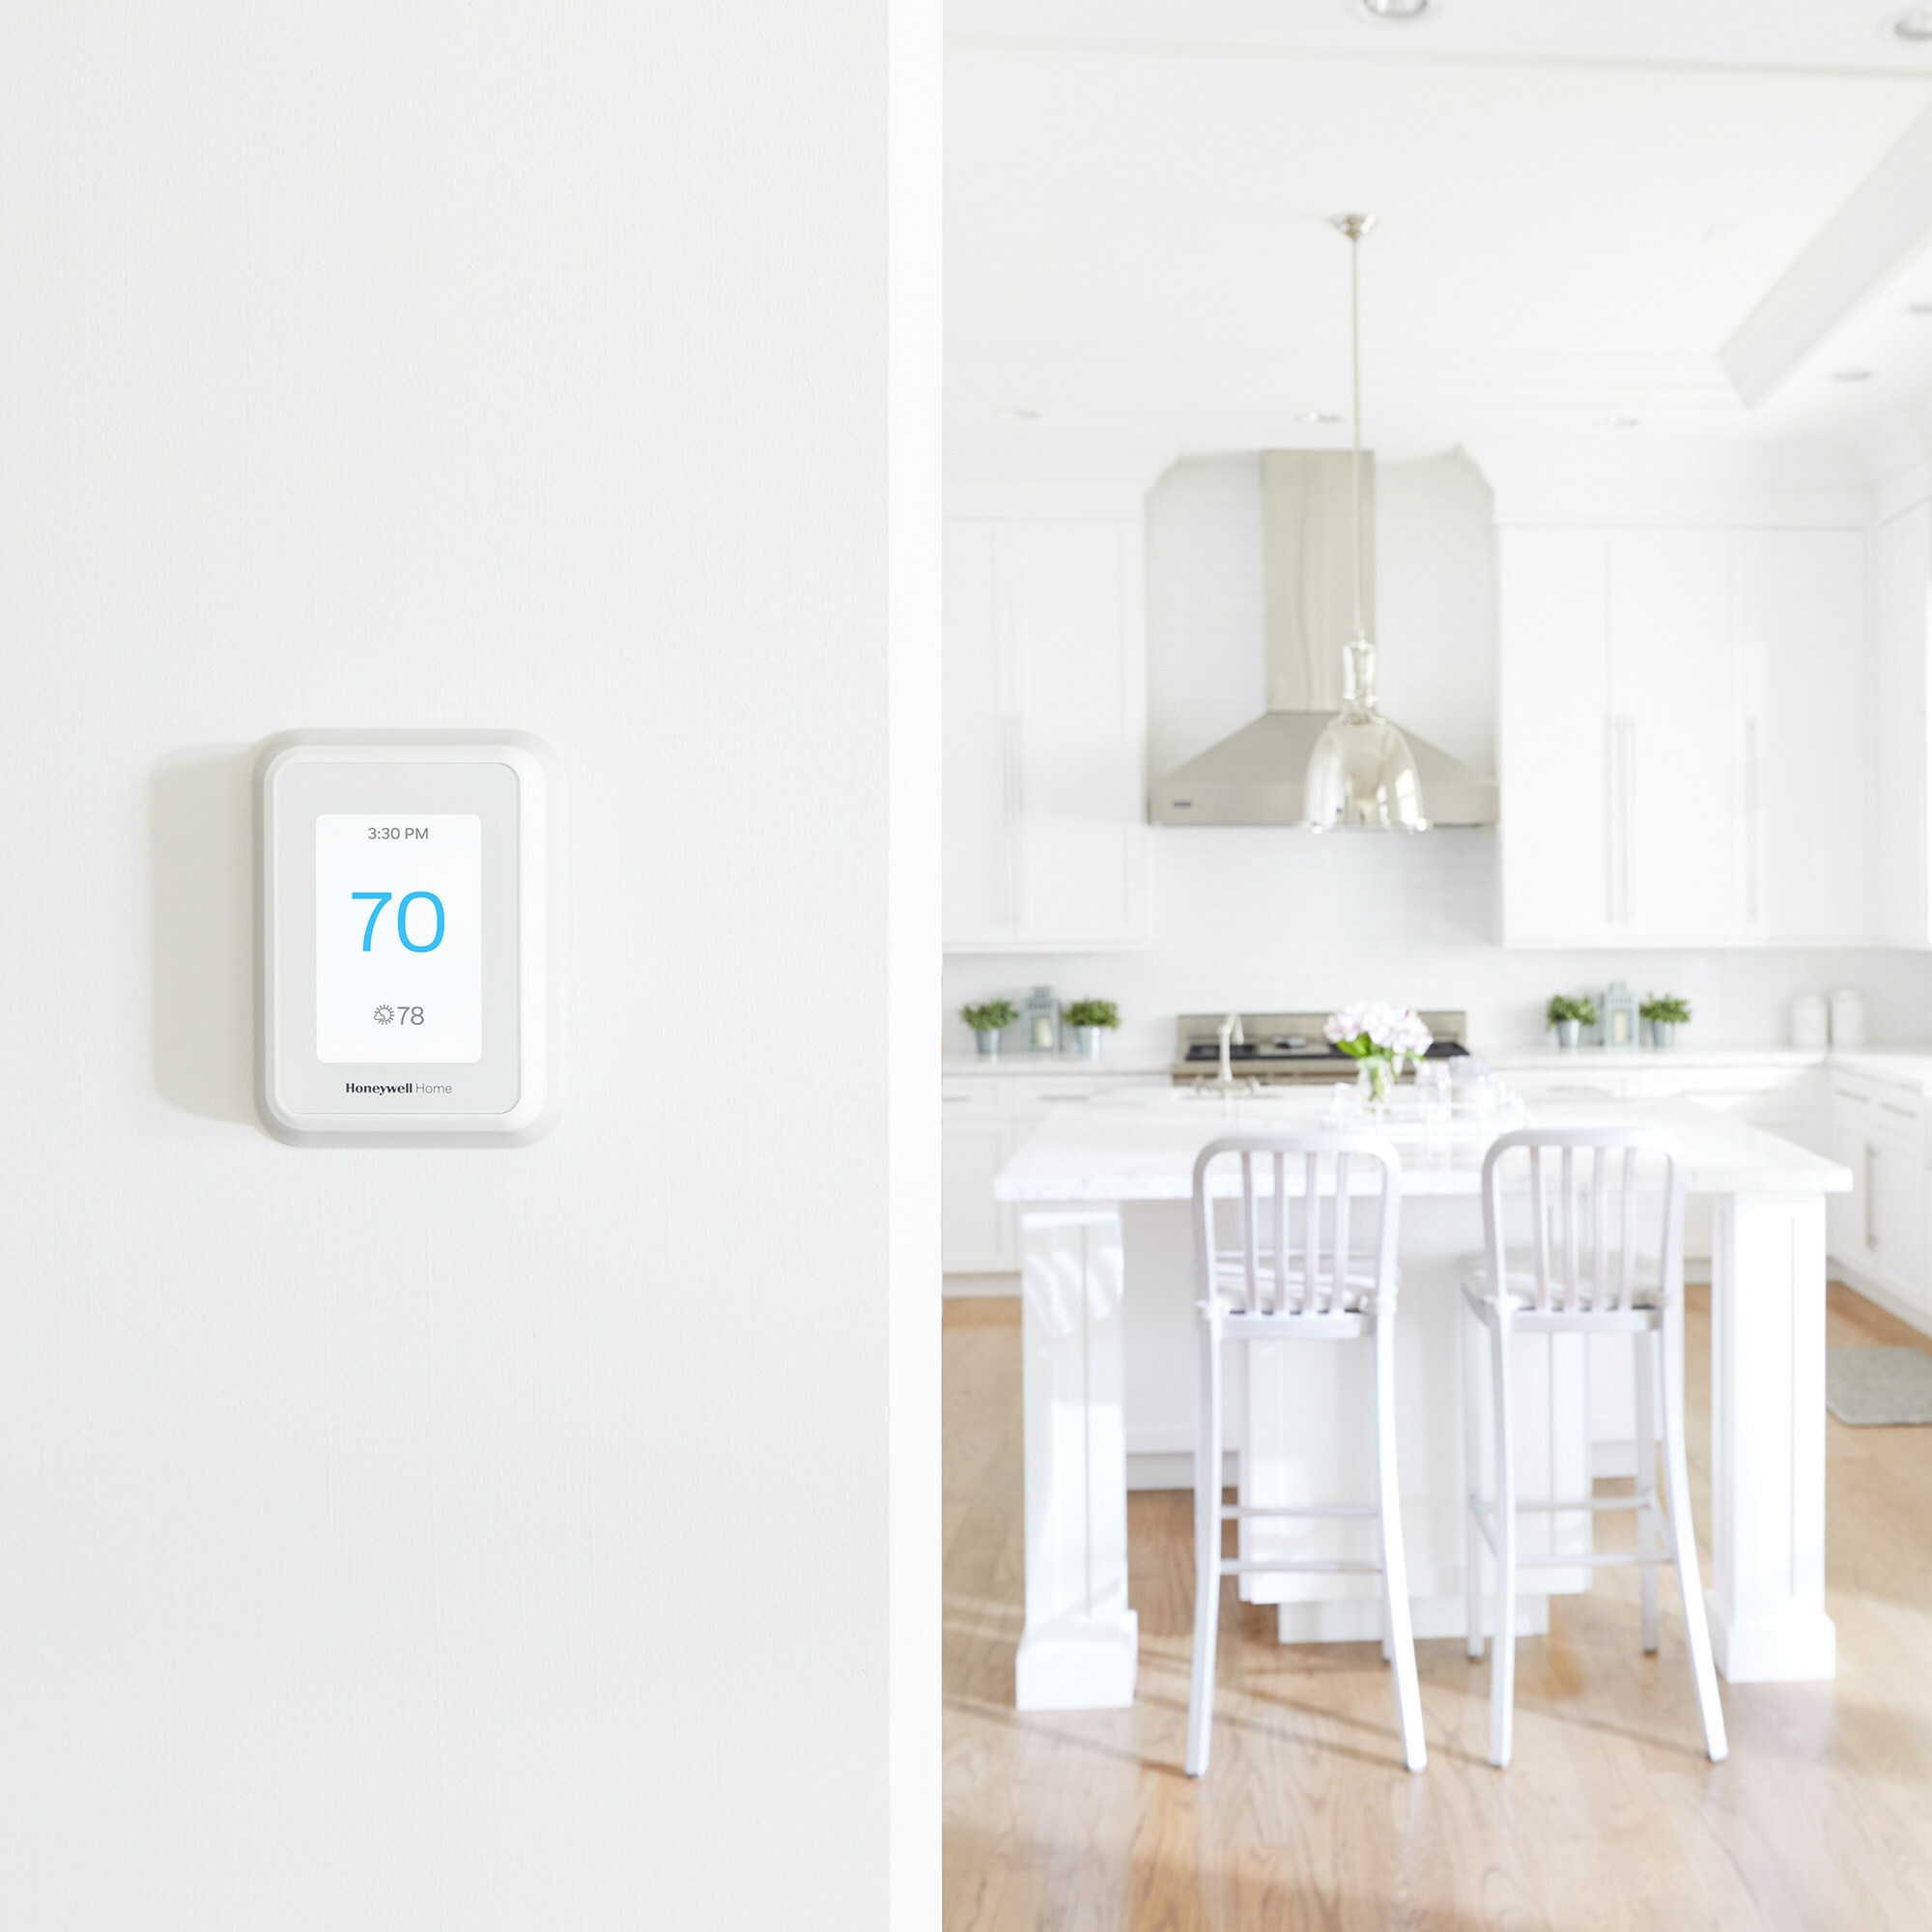 Ford and Resideo are exploring new areas of value for customers who own an F-150 Lightning and a Resideo smart thermostat to help enable potential monthly electric bill savings, increased comfort and more efficient home energy use